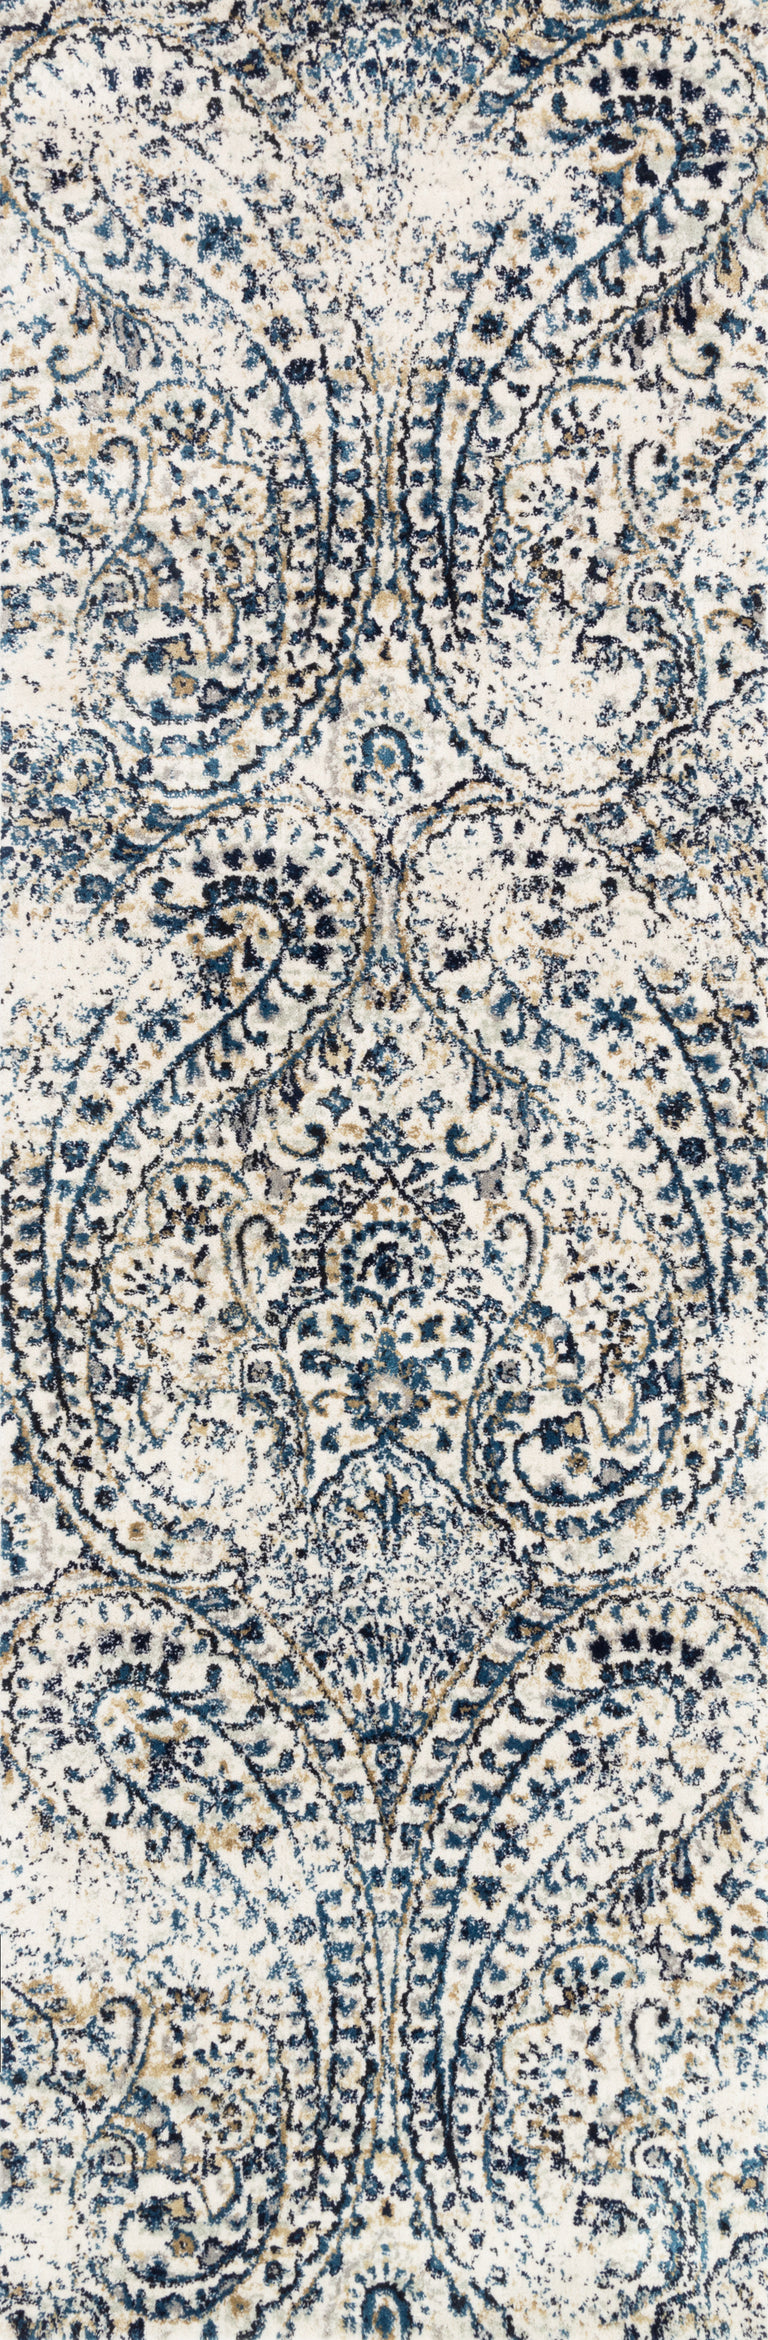 Loloi Rugs Torrance Collection Rug in Ivory, Indigo - 9'3" x 13'